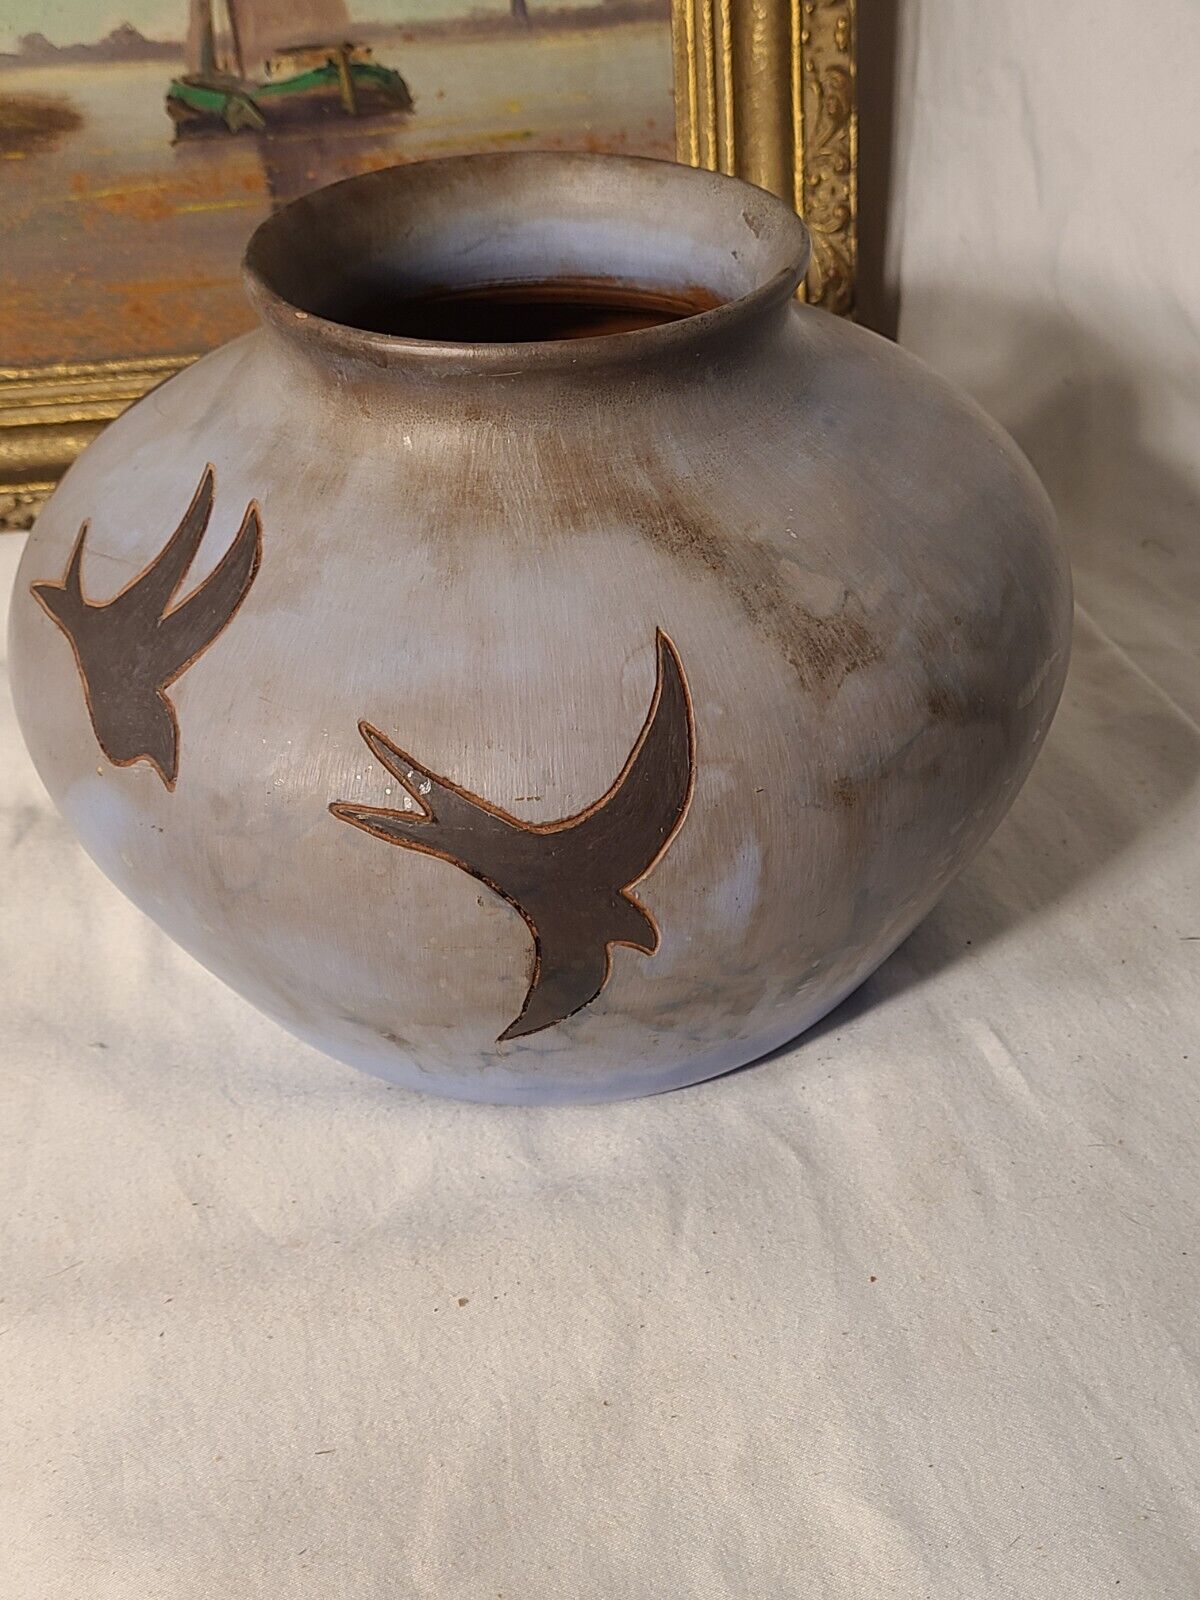 Navajo Native American Hand Etched Clay Pot Pottery Signed P. Savage w/Arrowhead